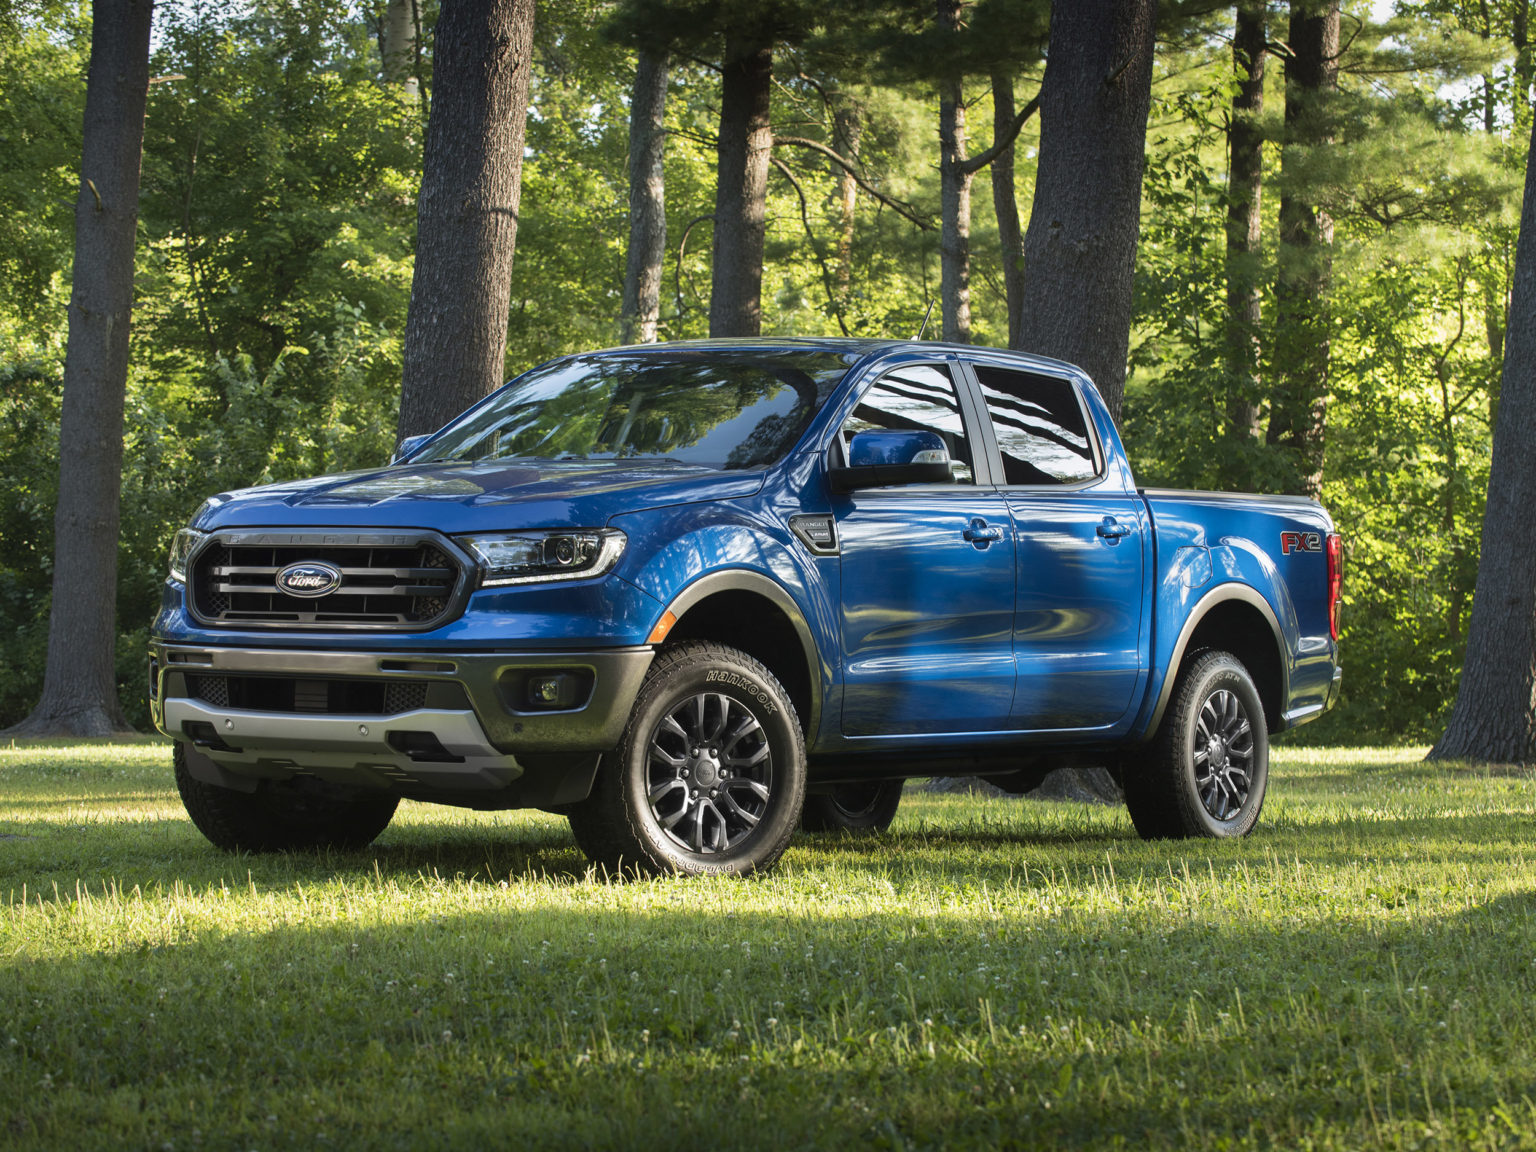 A few Ford models made the list.